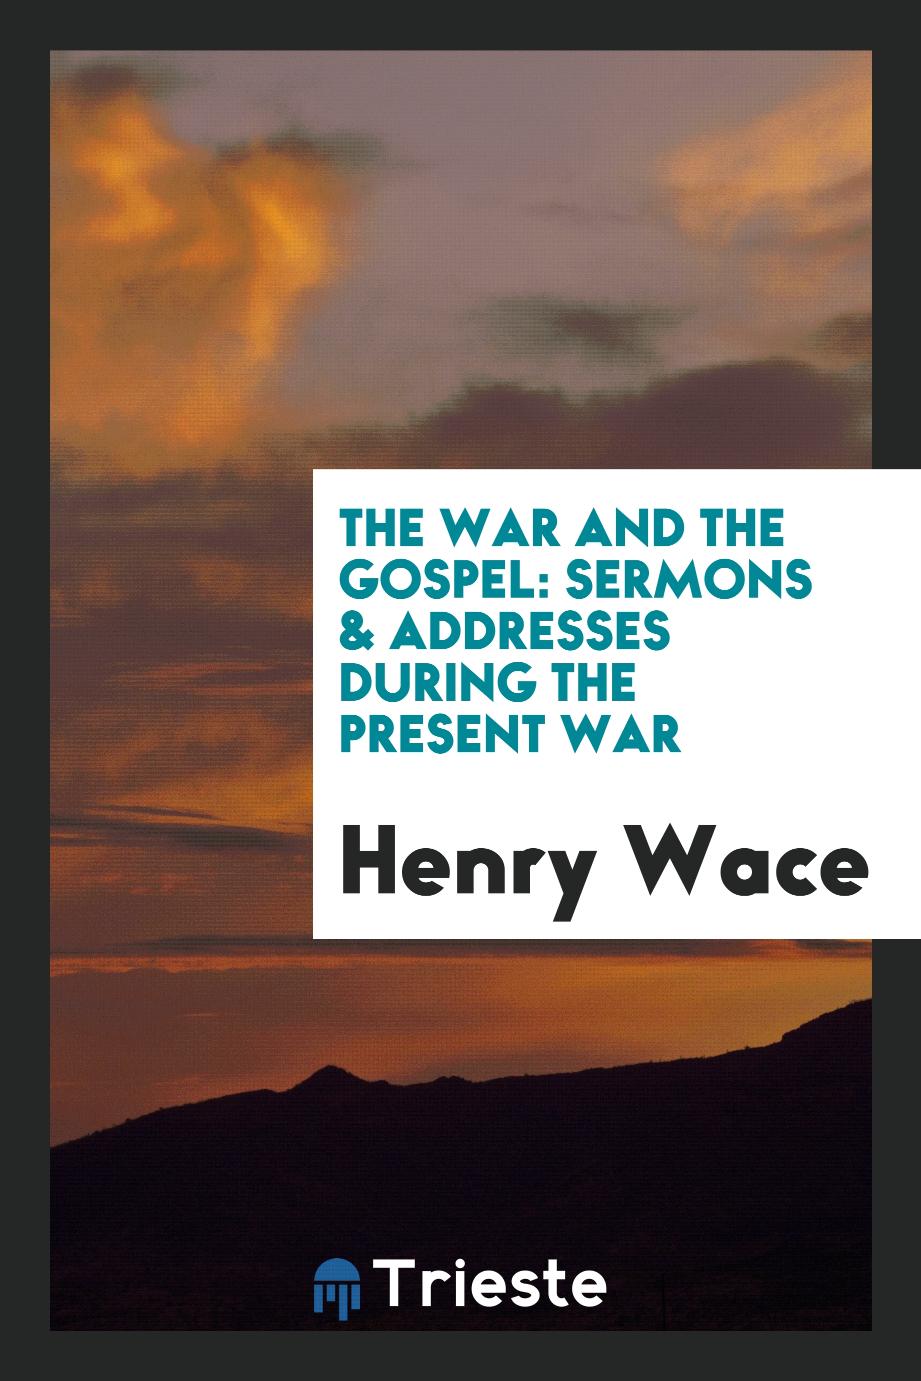 The War and the Gospel: Sermons & Addresses During the Present War